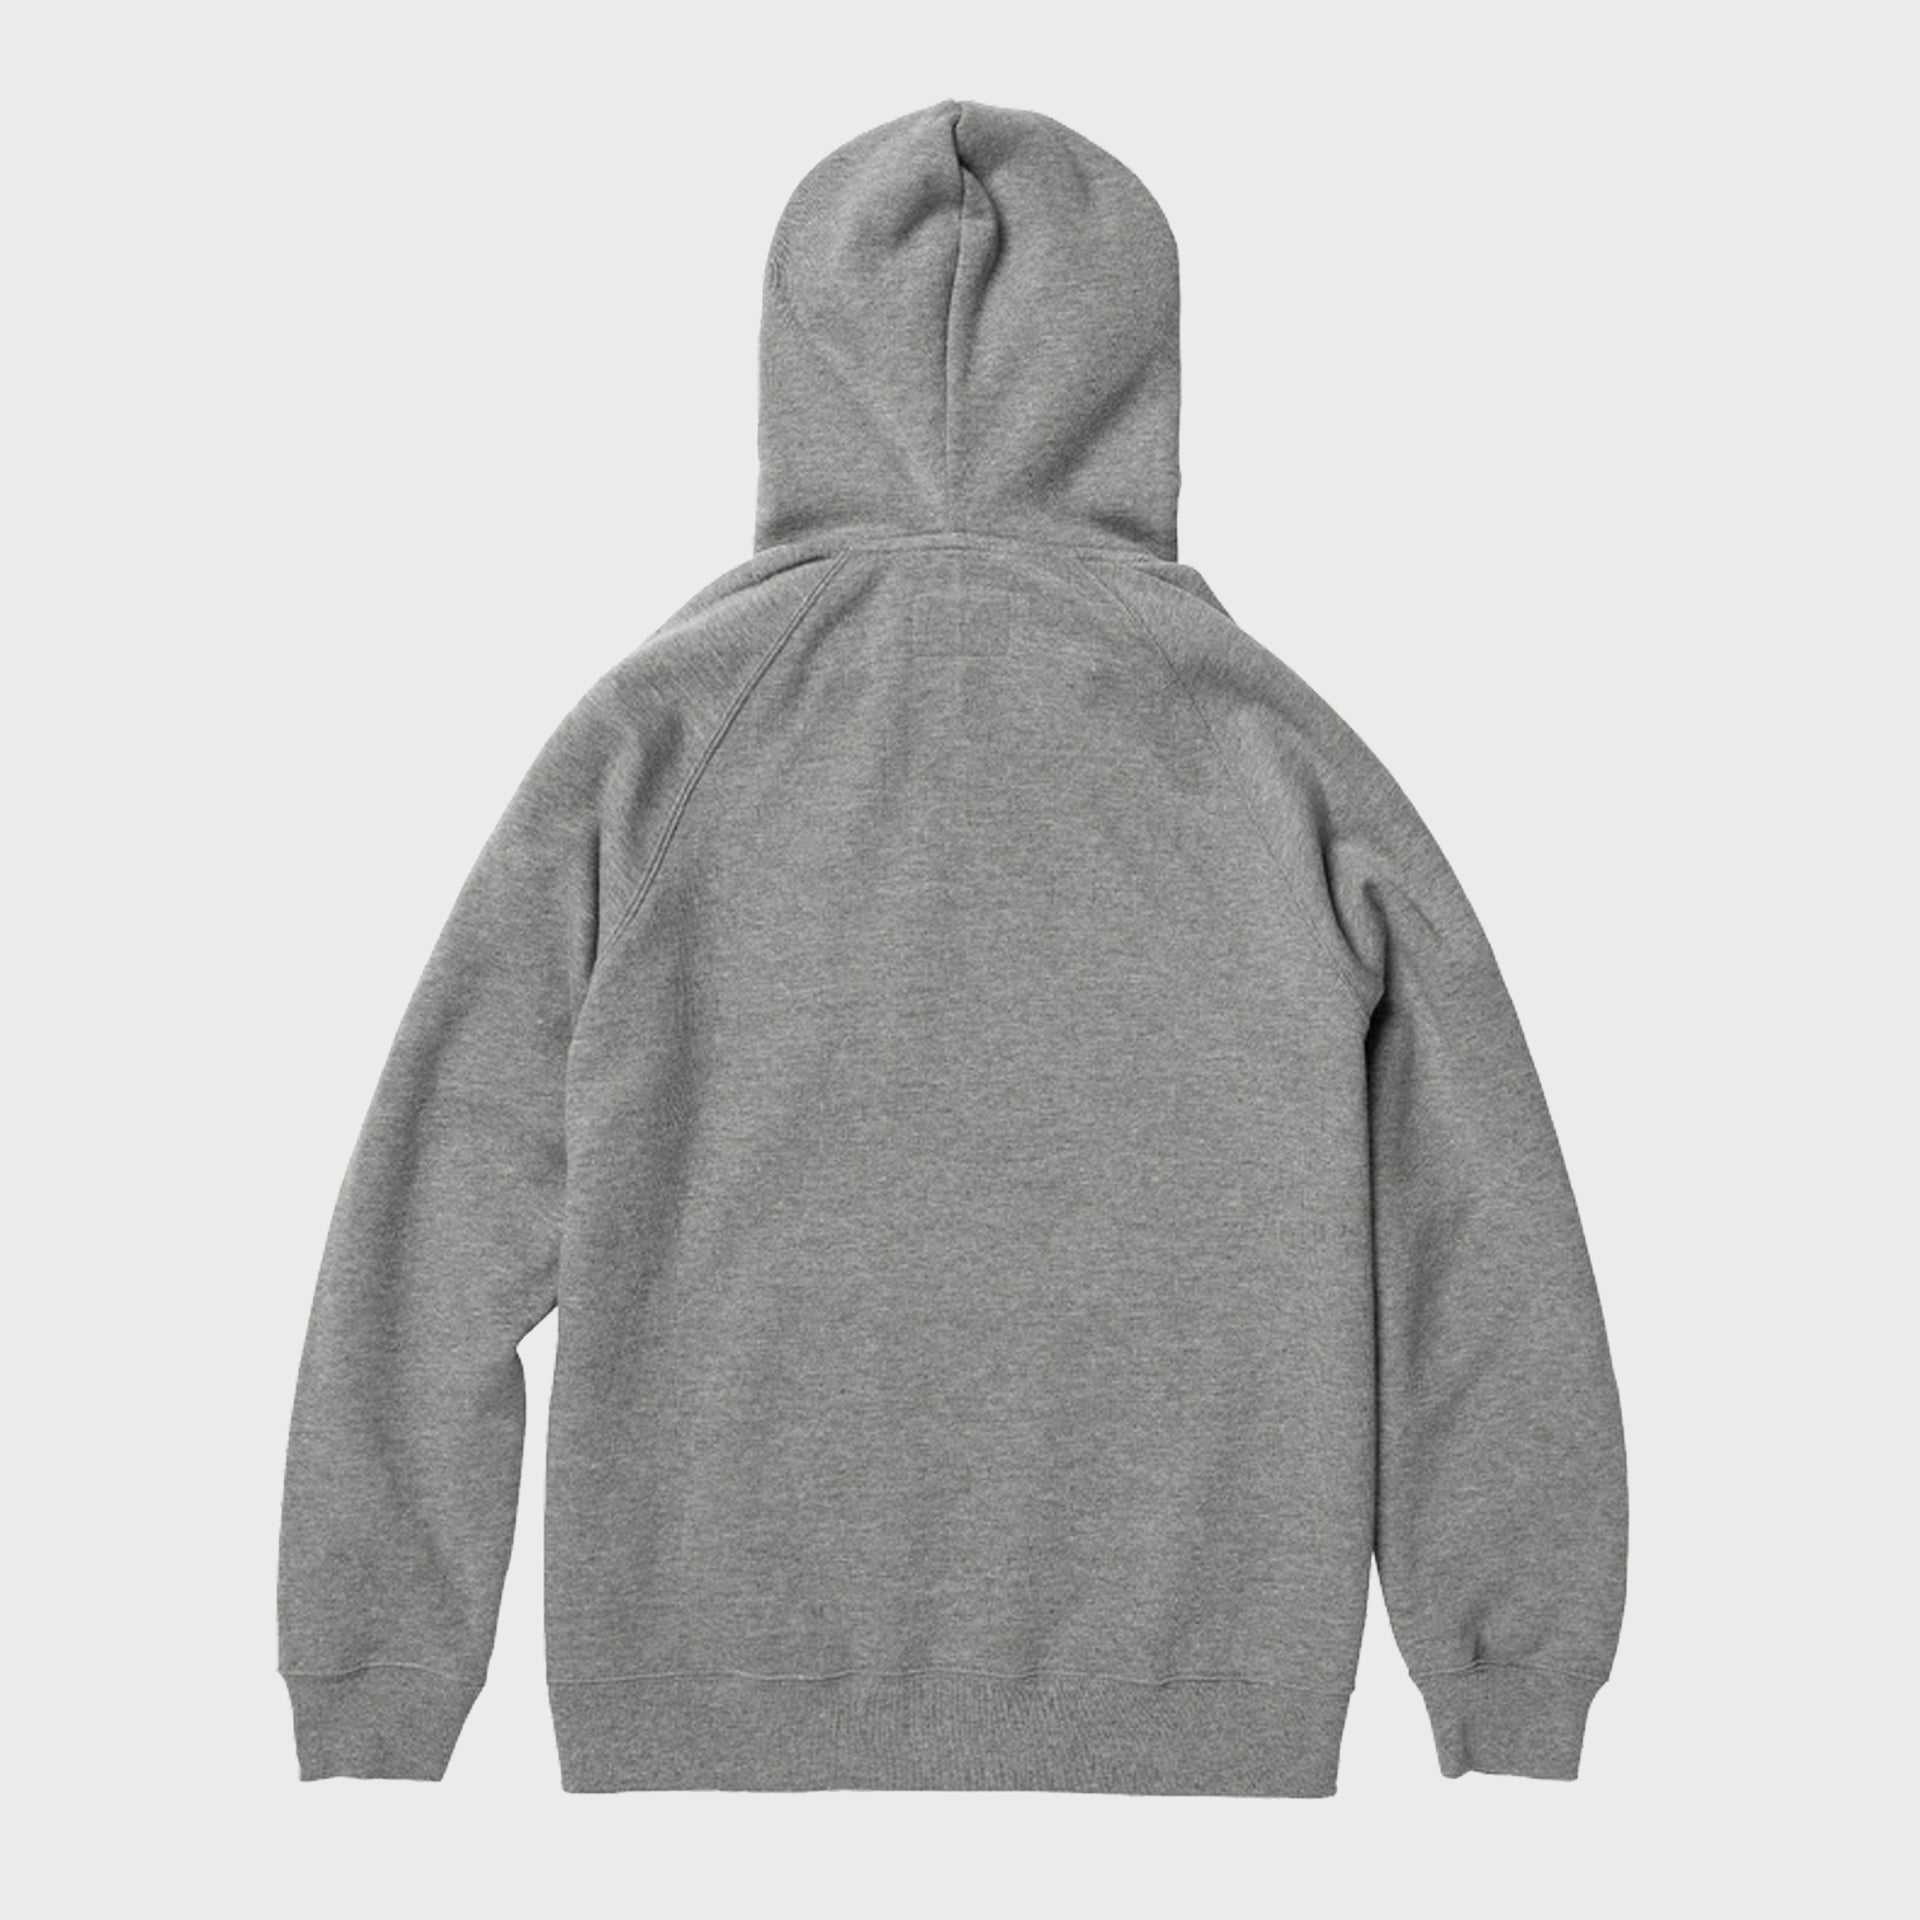 Captain Fin Mens Shweaty Naval Pullover Hoodie - Heather Grey - ManGo Surfing